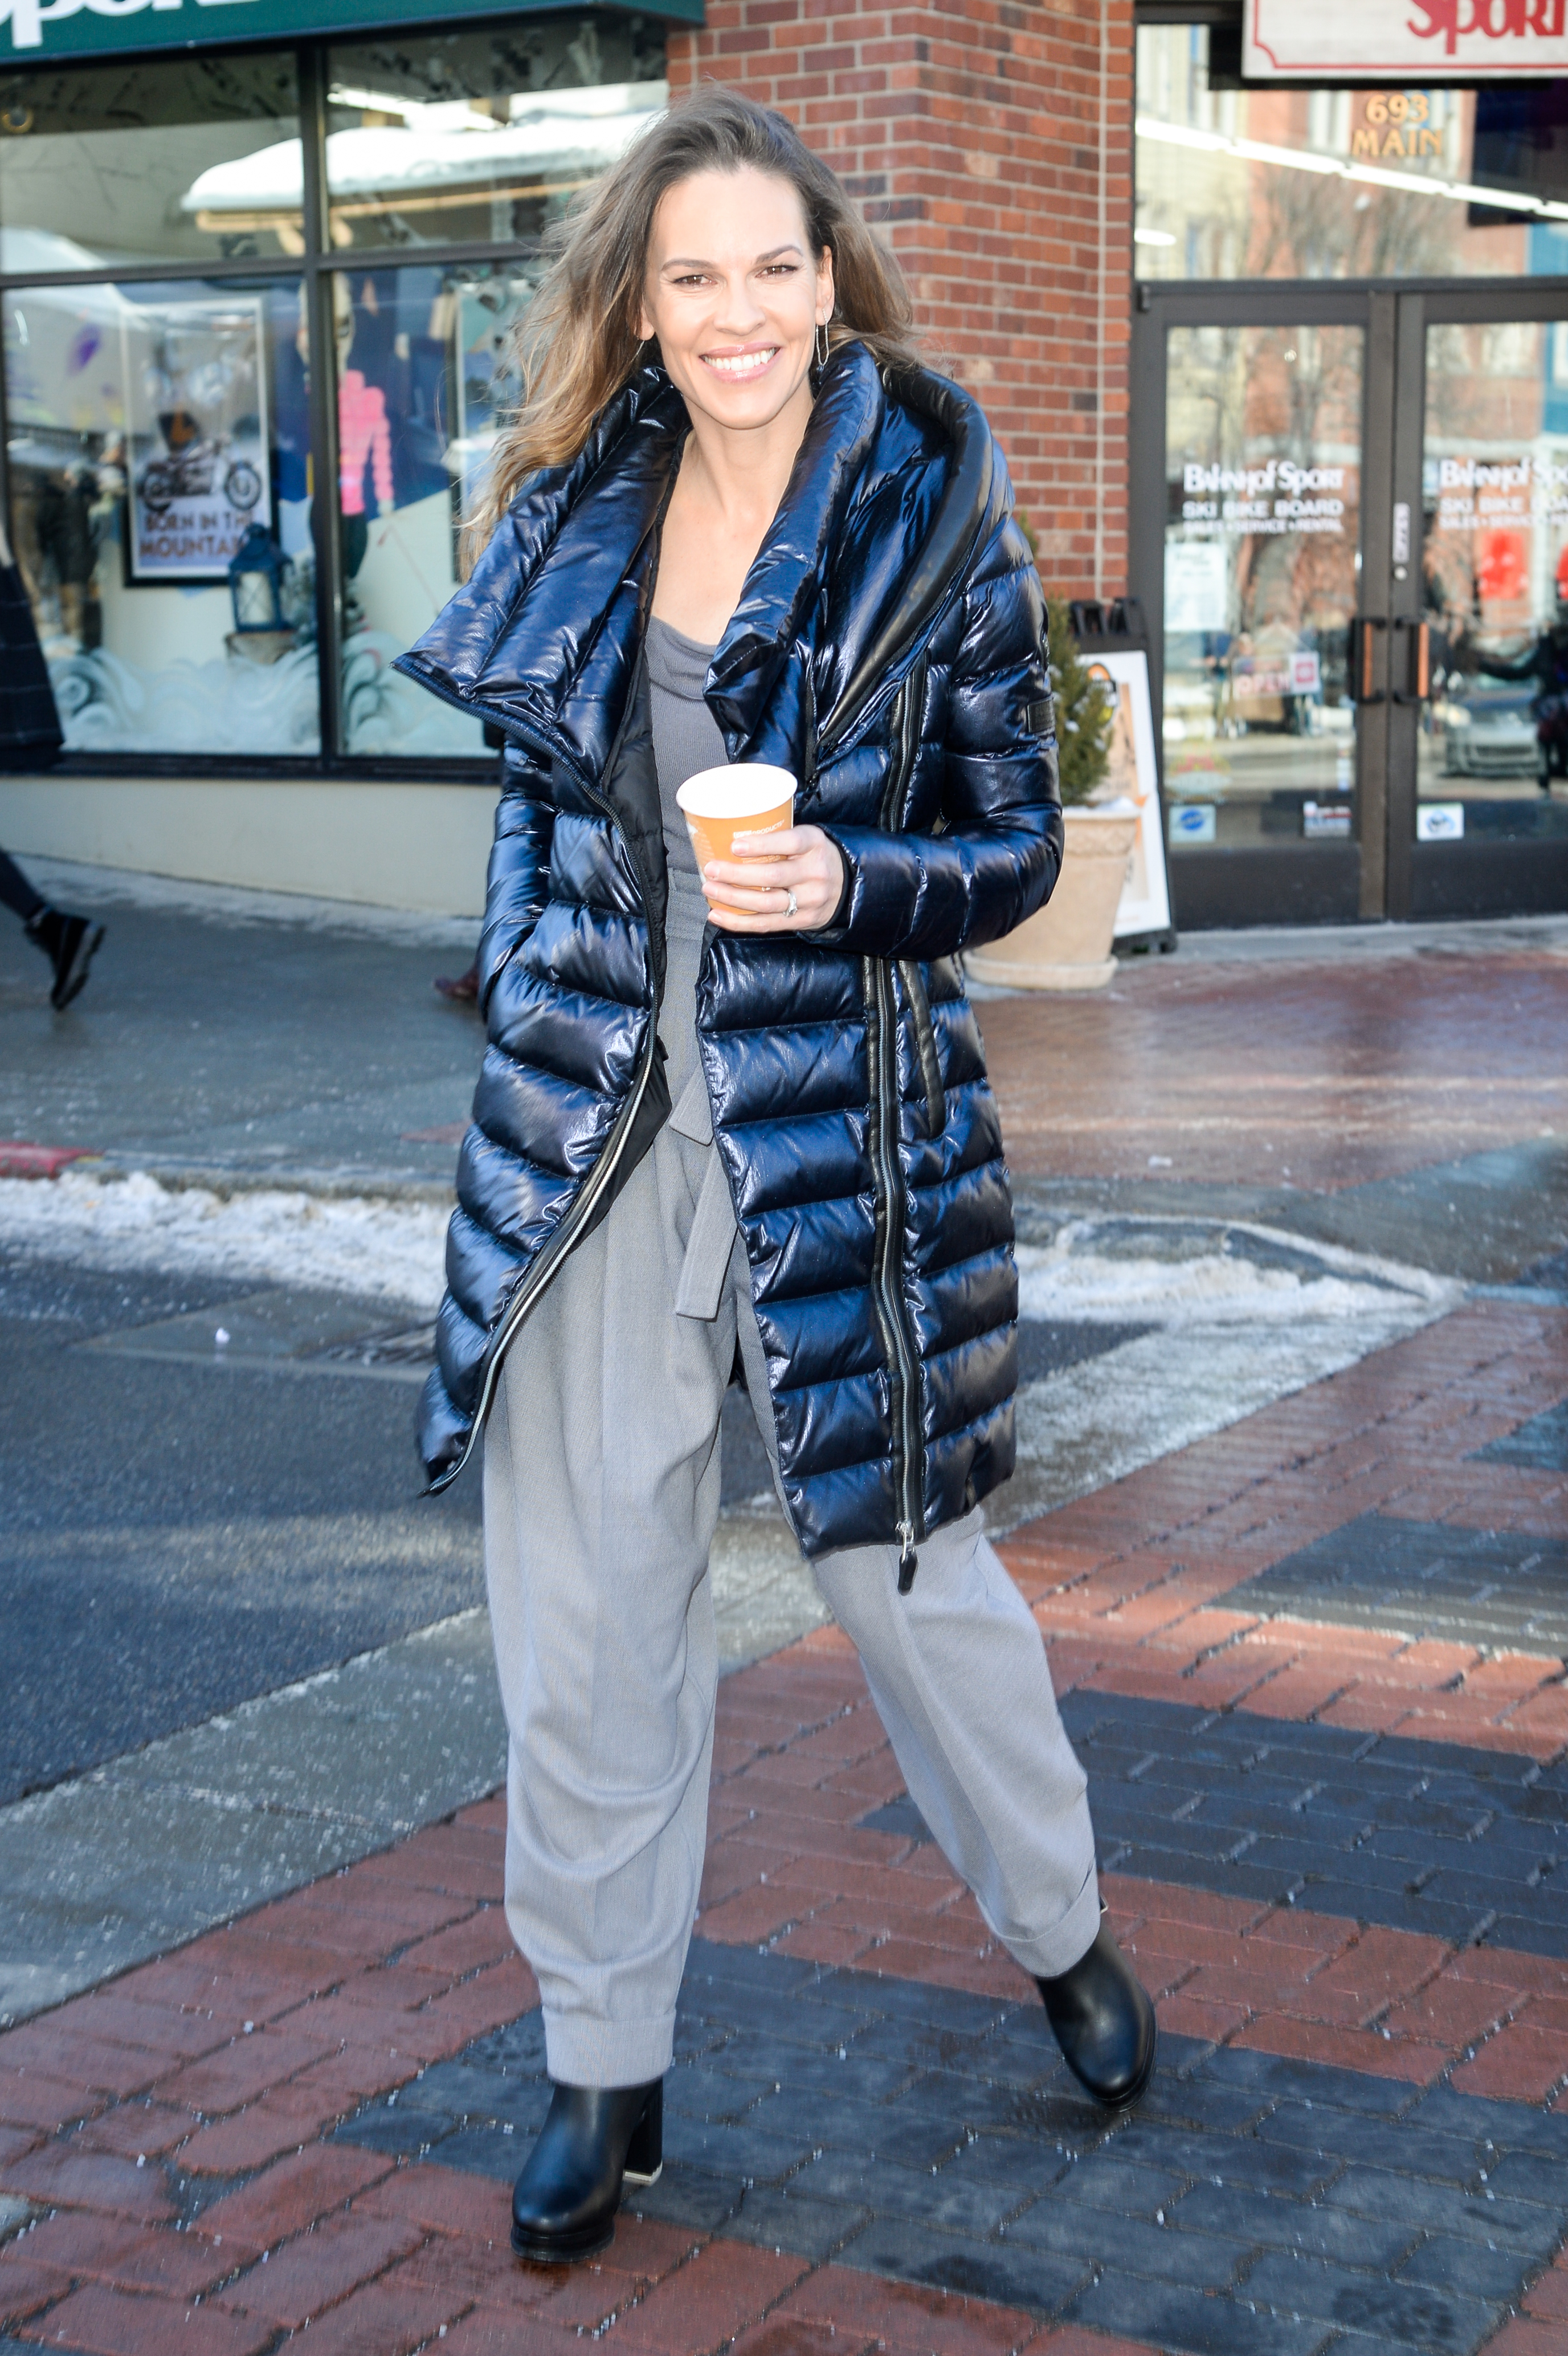 Hilary Swank attends the 2019 Sundance Film Festival on January 26, 2019 in Park City, Utah | Source: Getty Images